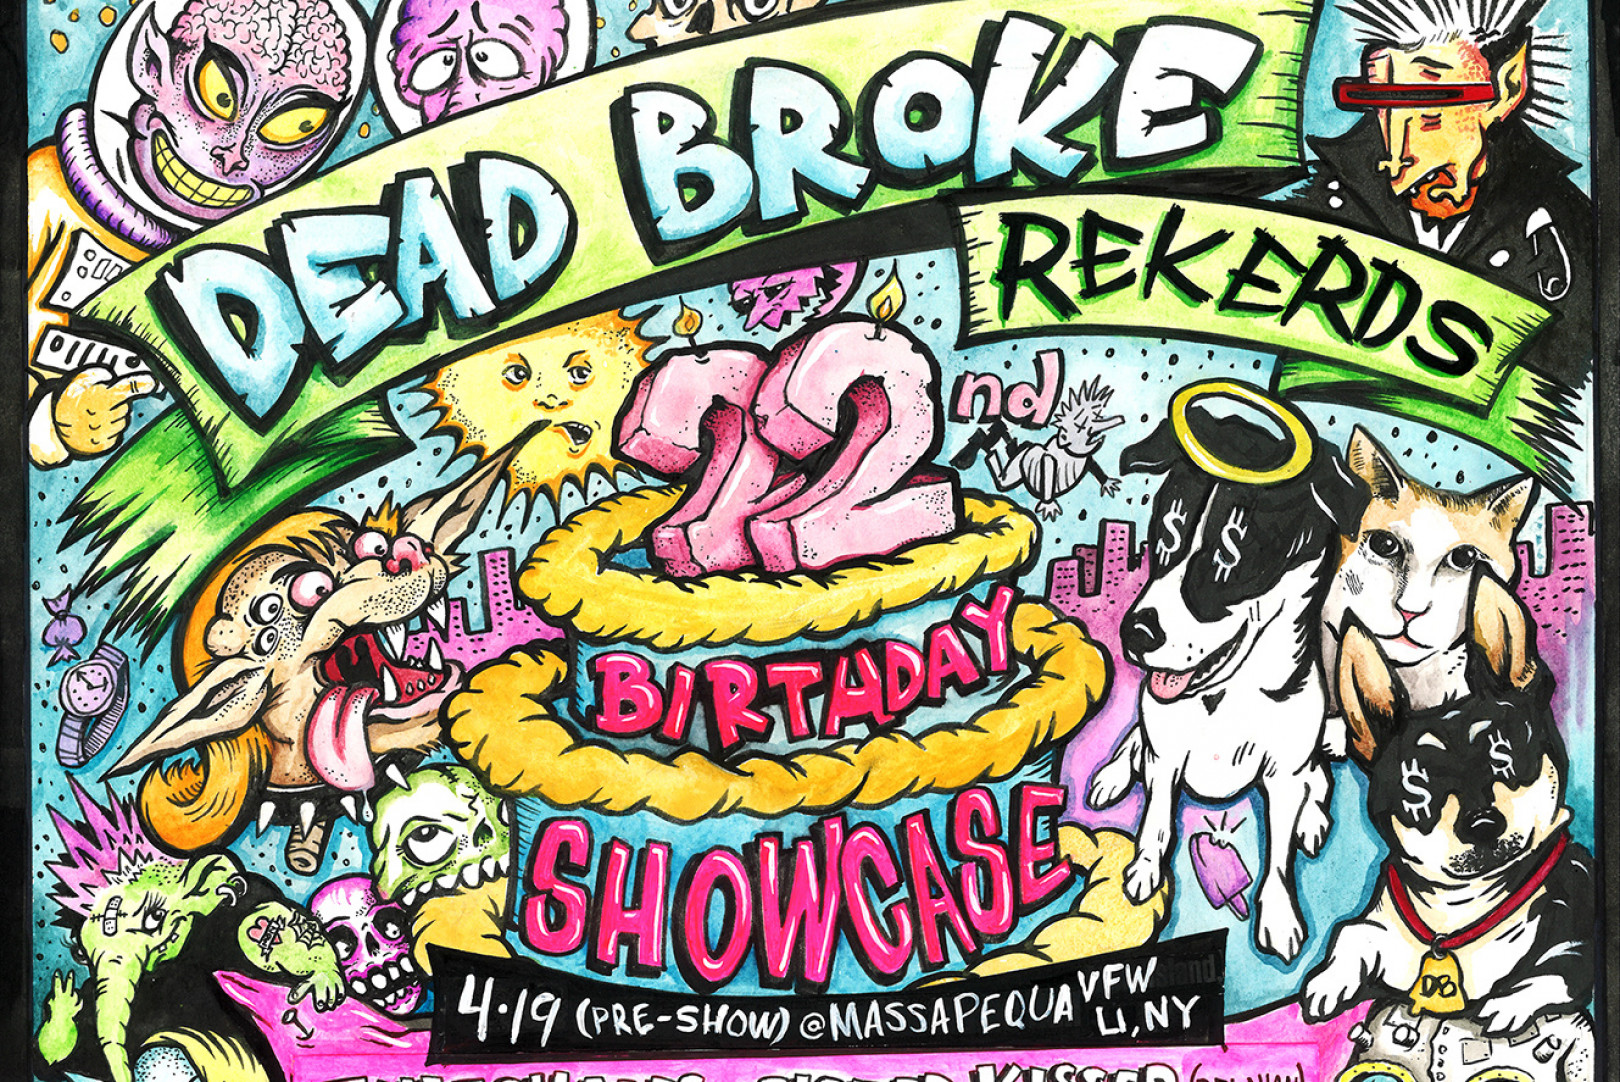 Iron Chic, Toys that Kill, Timeshared, more to play Dead Broke 22nd B-day showcase